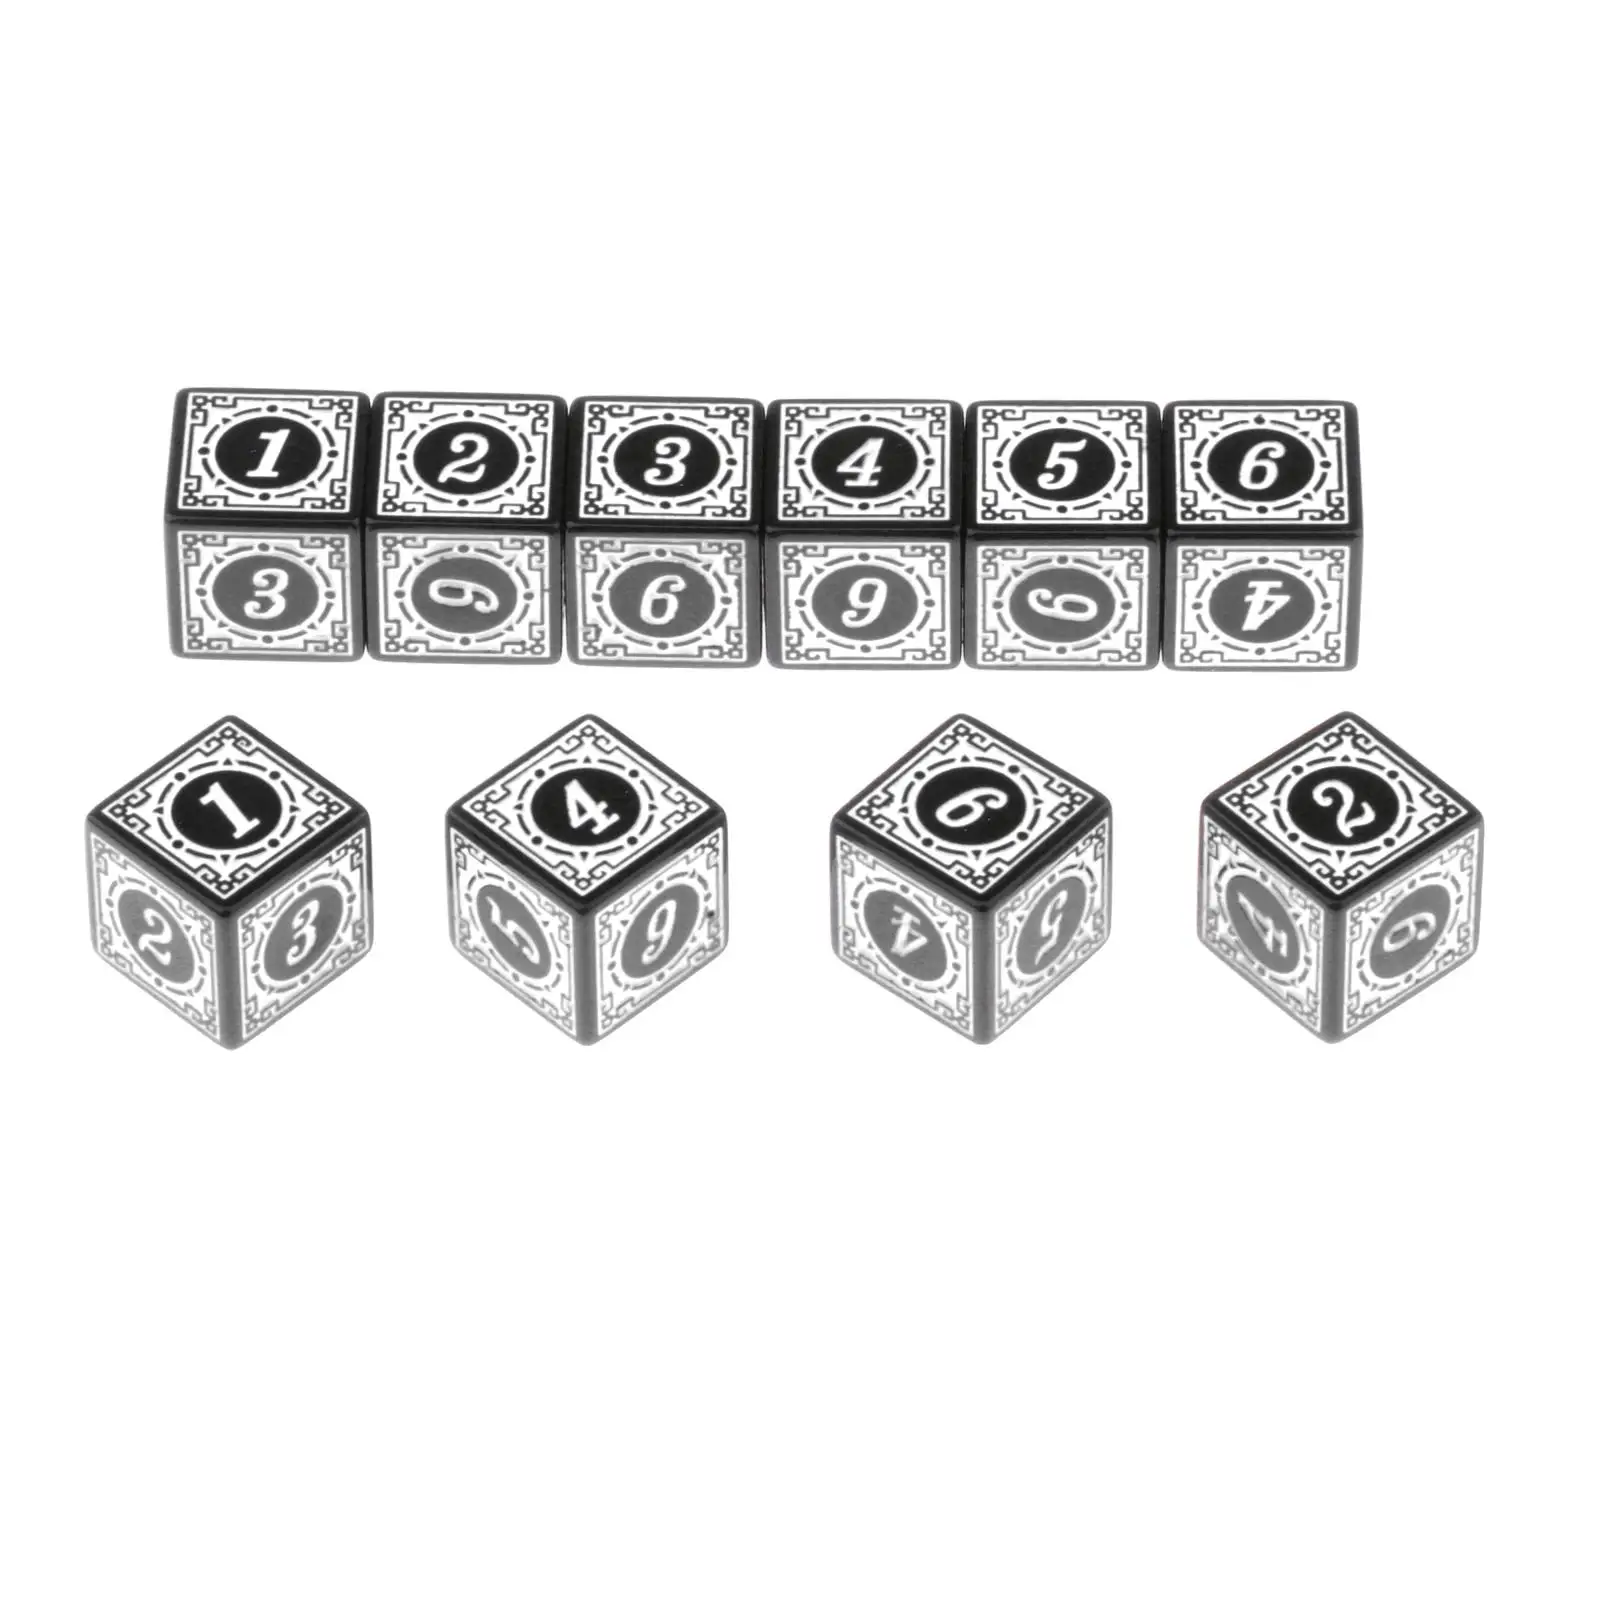 10pcs/set 6 Side Polyhedral Dice Toys Multi Sided Acrylic Dices for Table Board Game Playing Games Dice